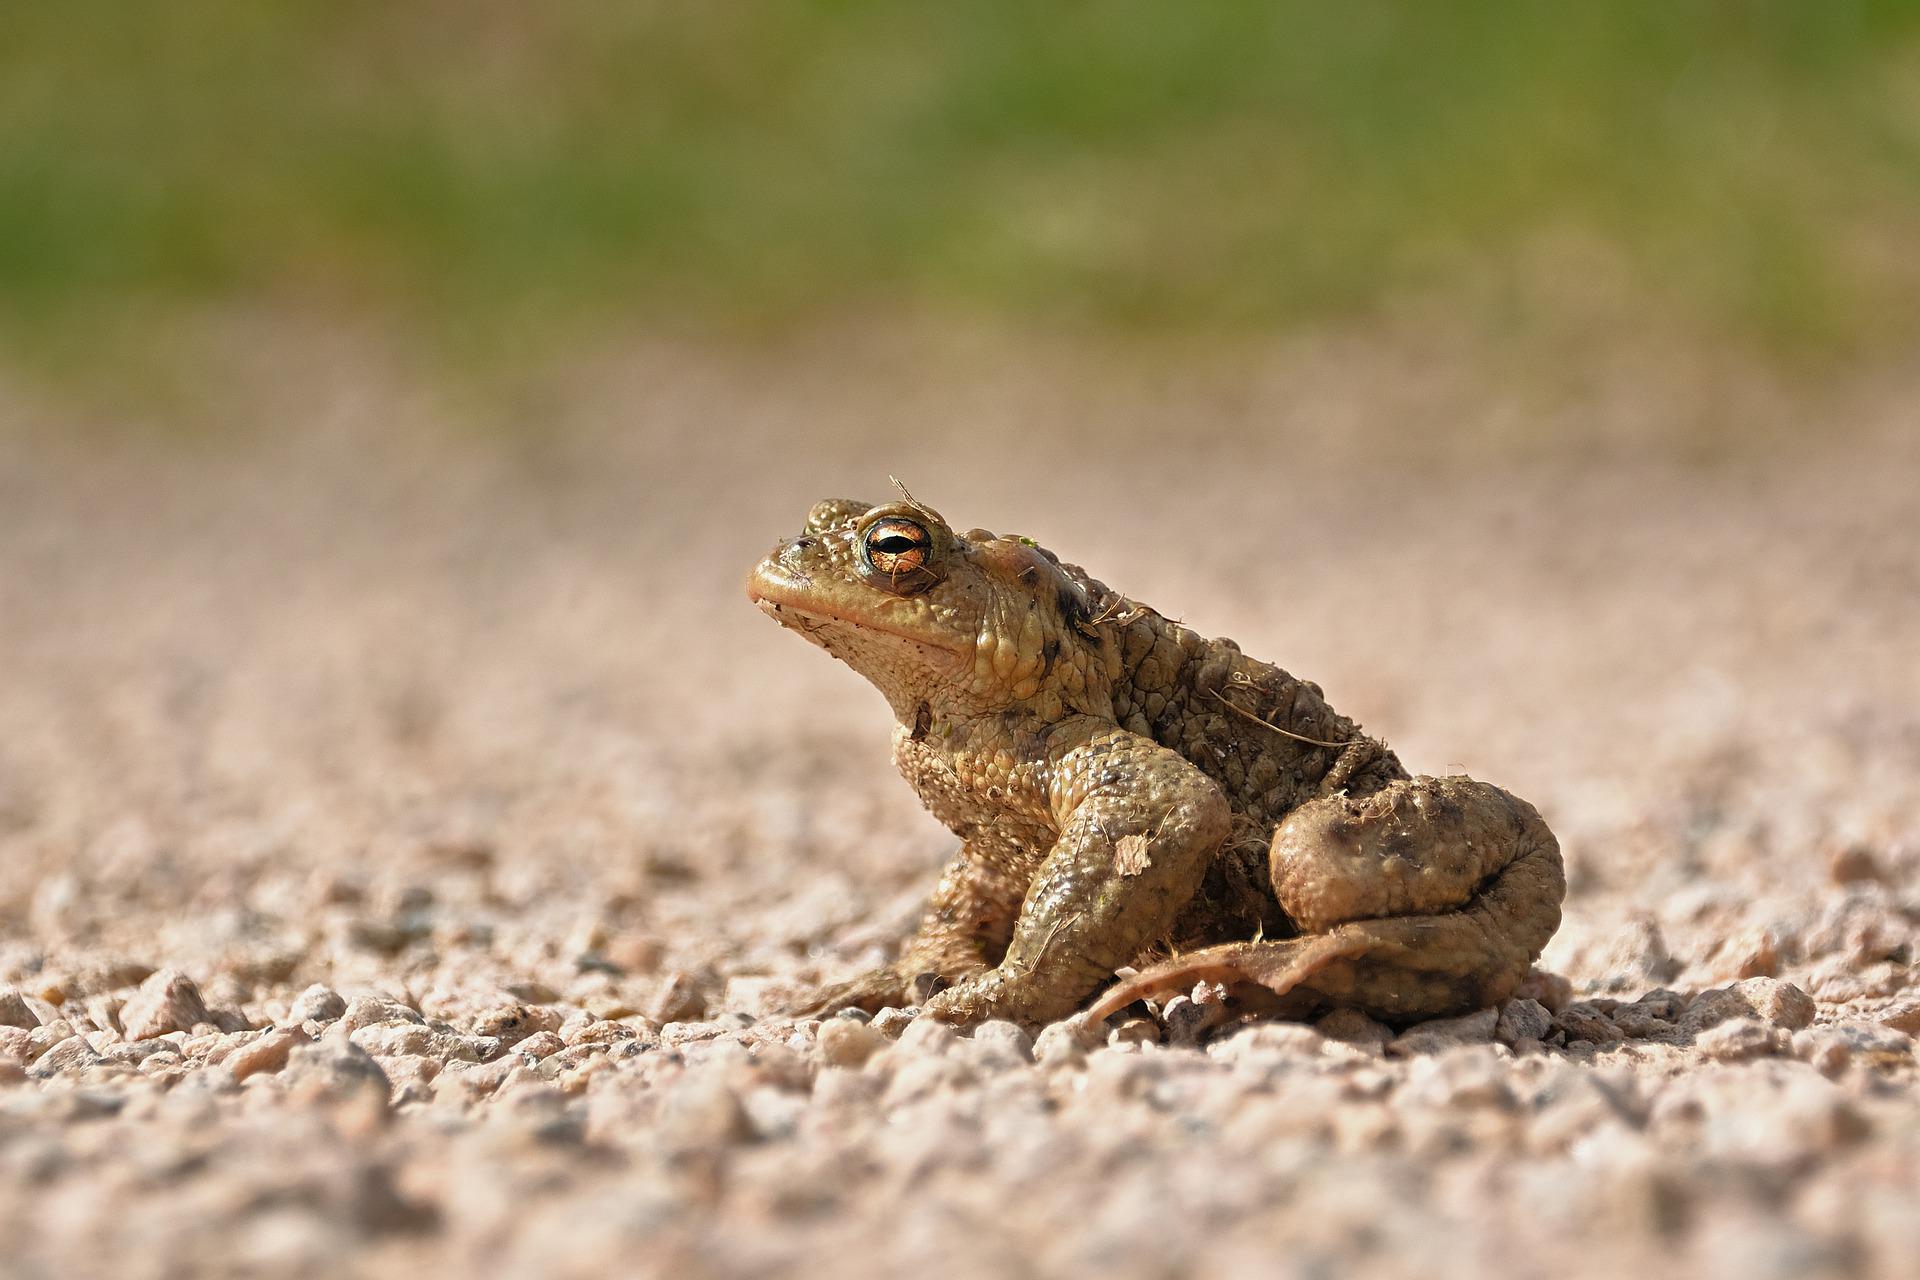 A picture of a toad chilling in the sand.